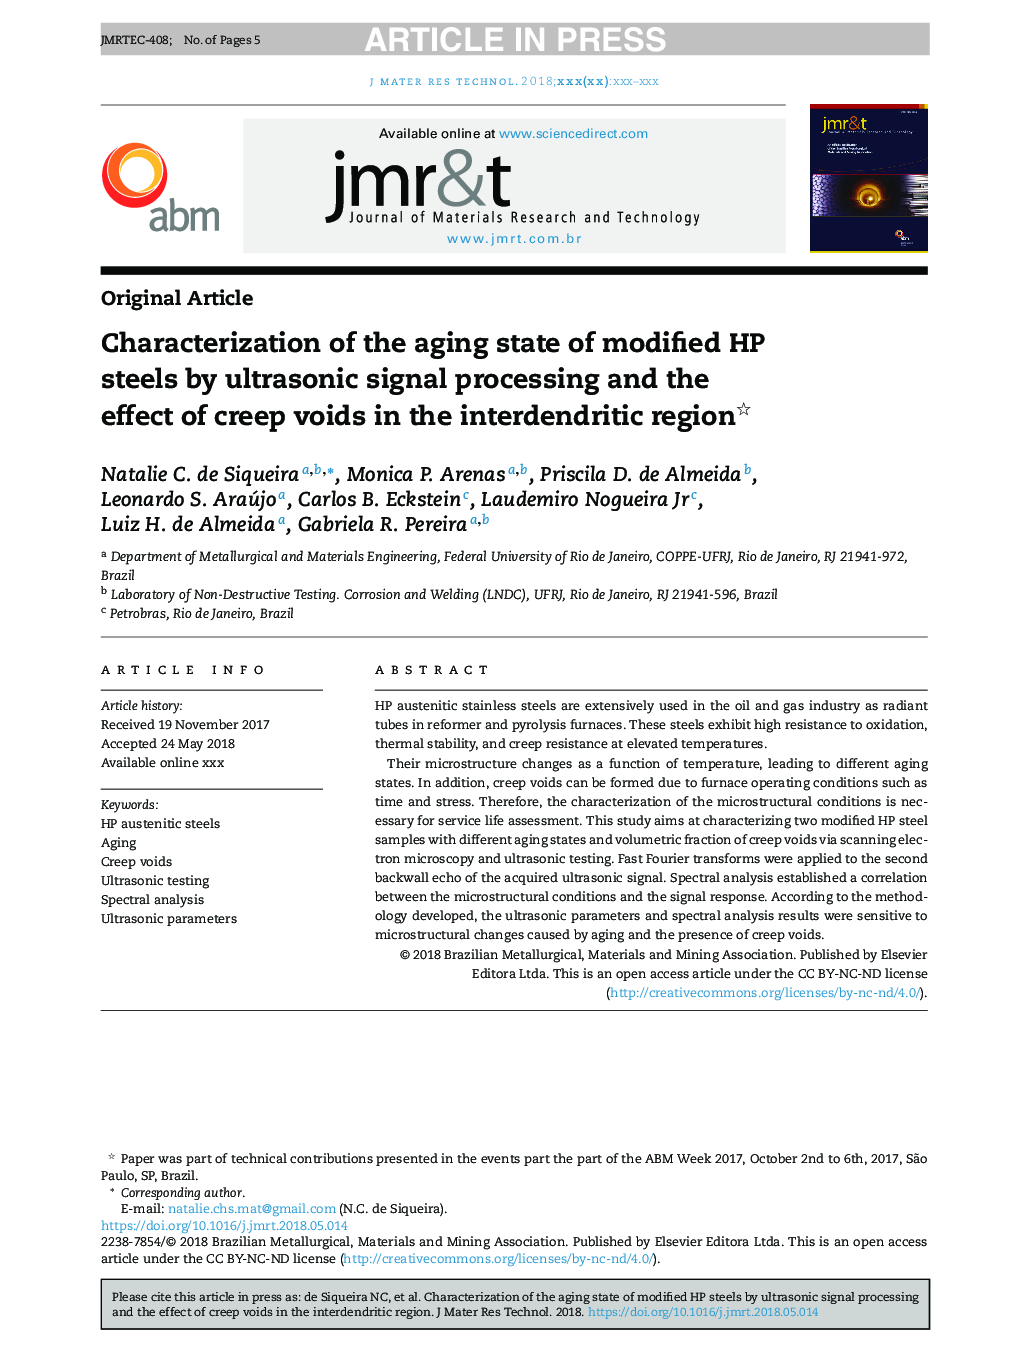 Characterization of the aging state of modified HP steels by ultrasonic signal processing and the effect of creep voids in the interdendritic region